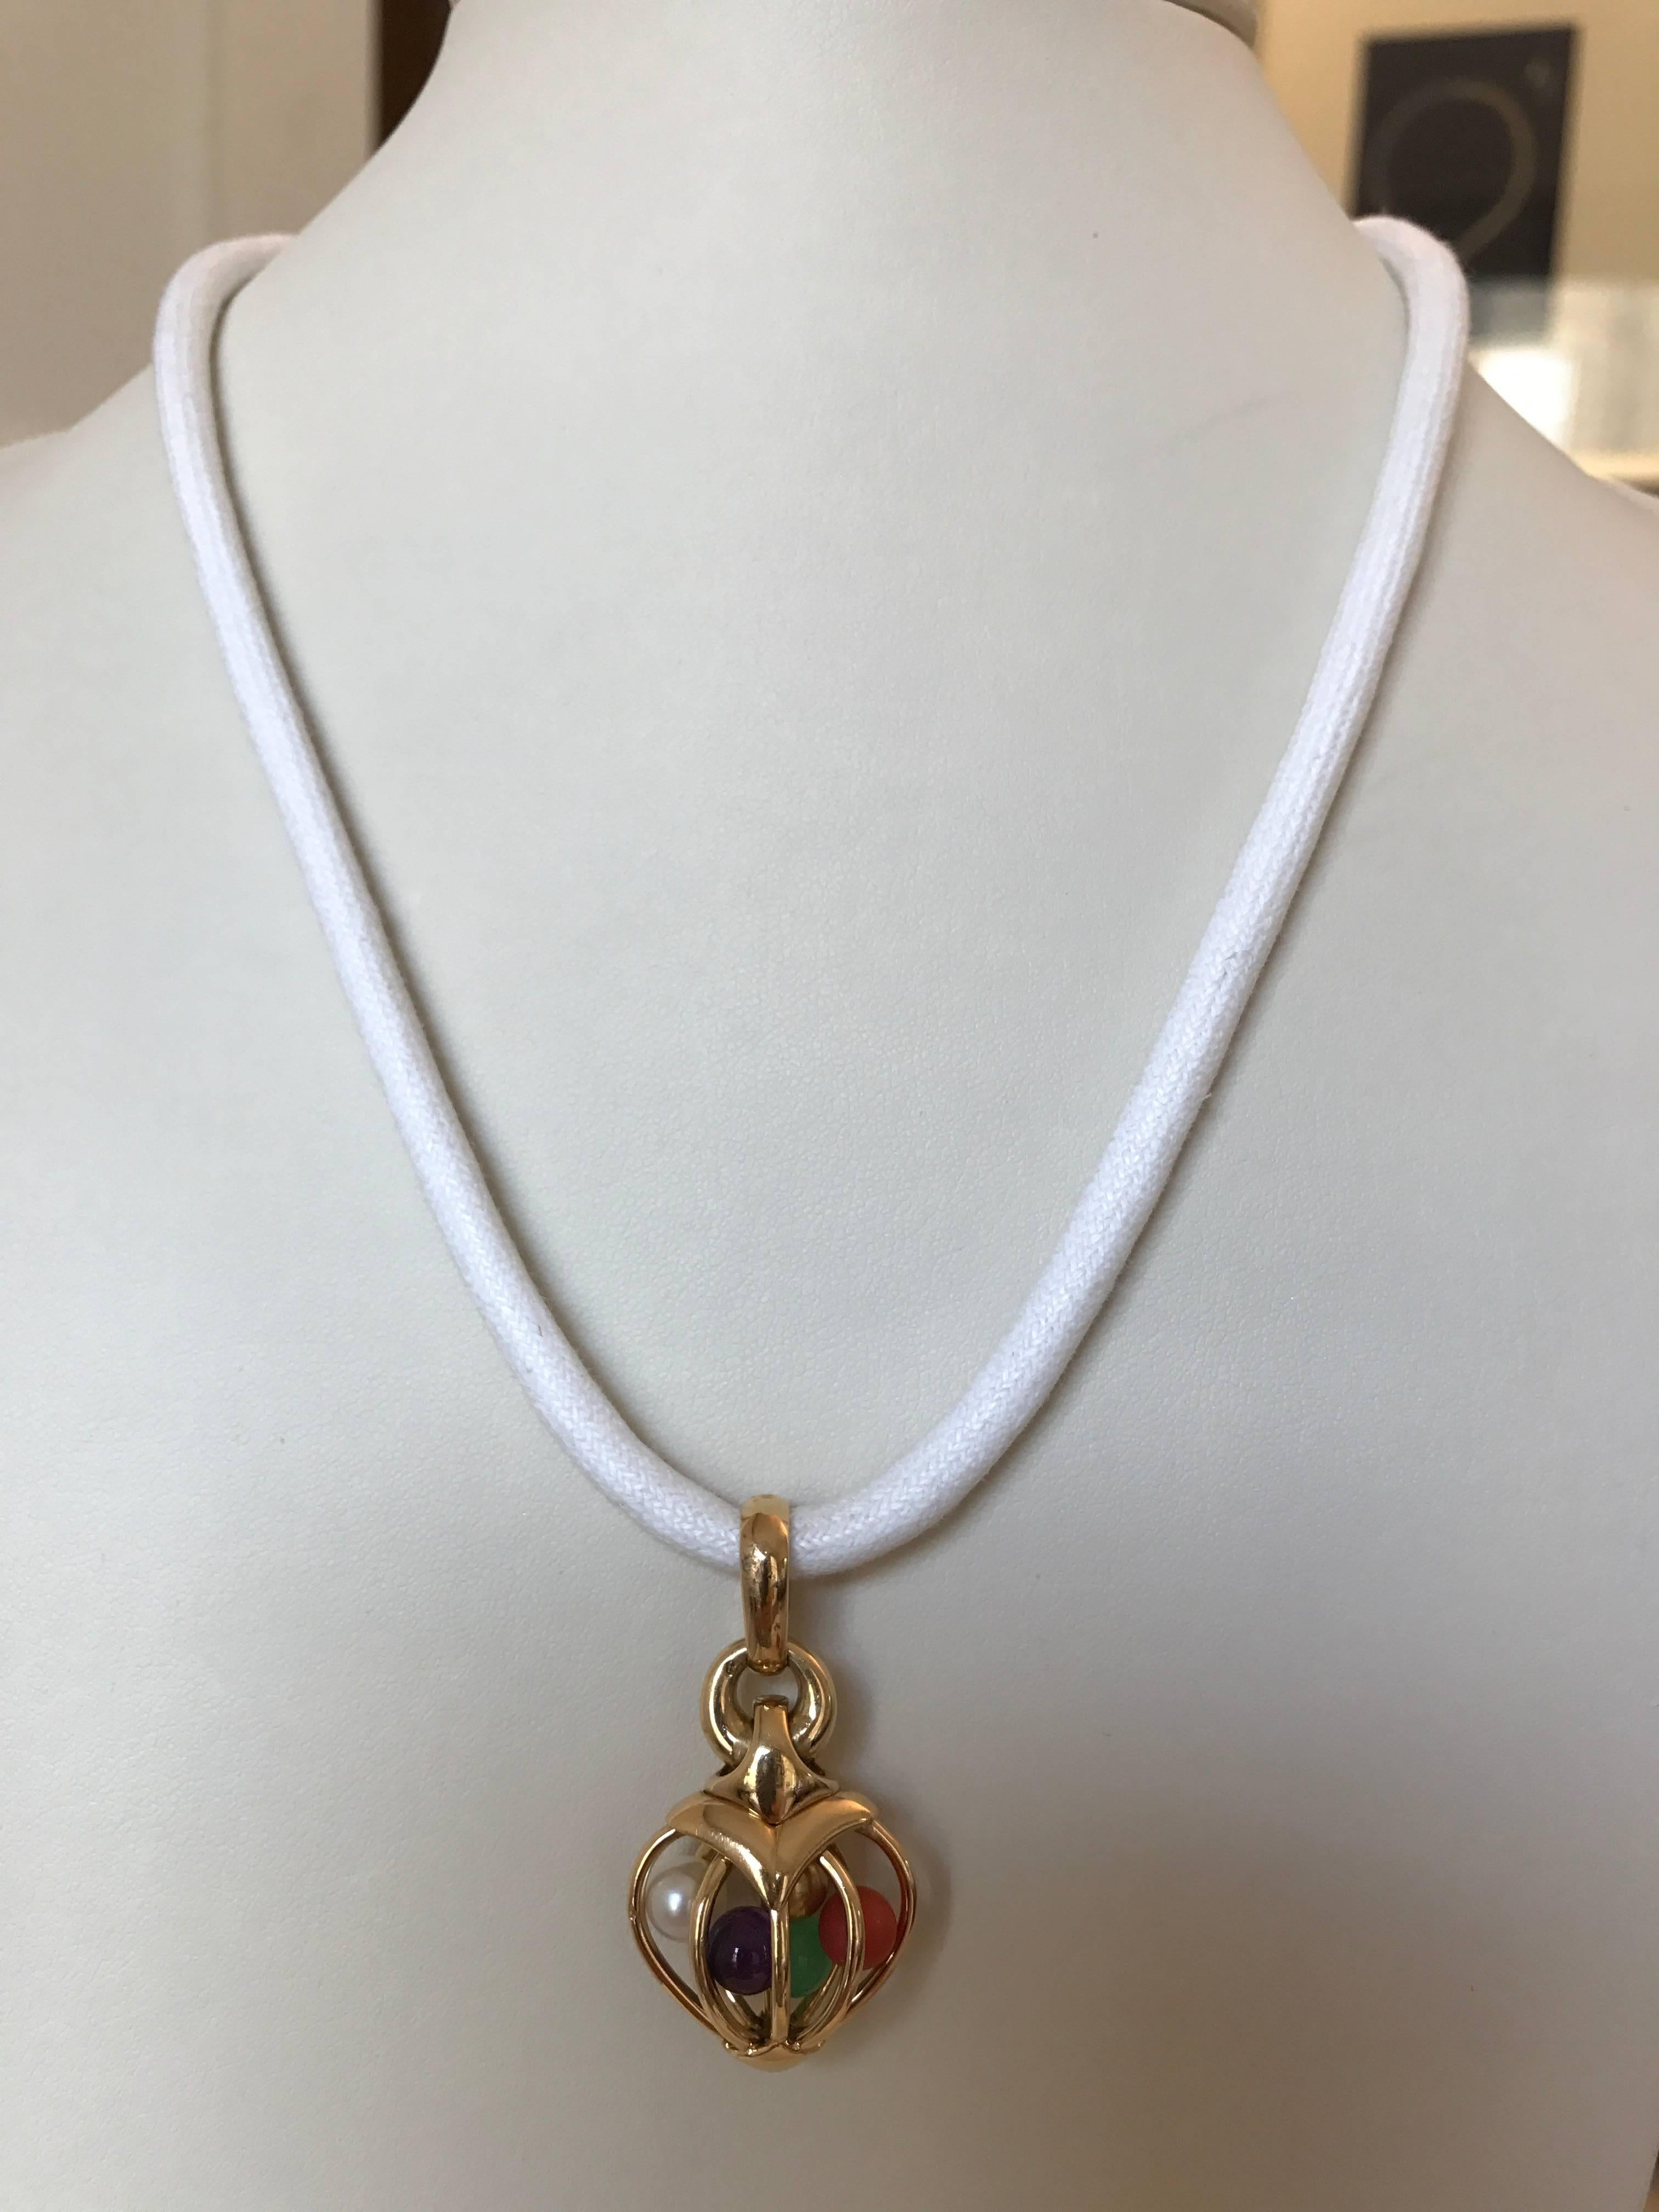 A most unusual and appealing 18ct yellow gold heart-shaped 'cage' pendant containing a pearl, a coral bead, an amethyst bead, a chrysoprase bead and a gold bead signed and numbered by Bvlgari *2337A